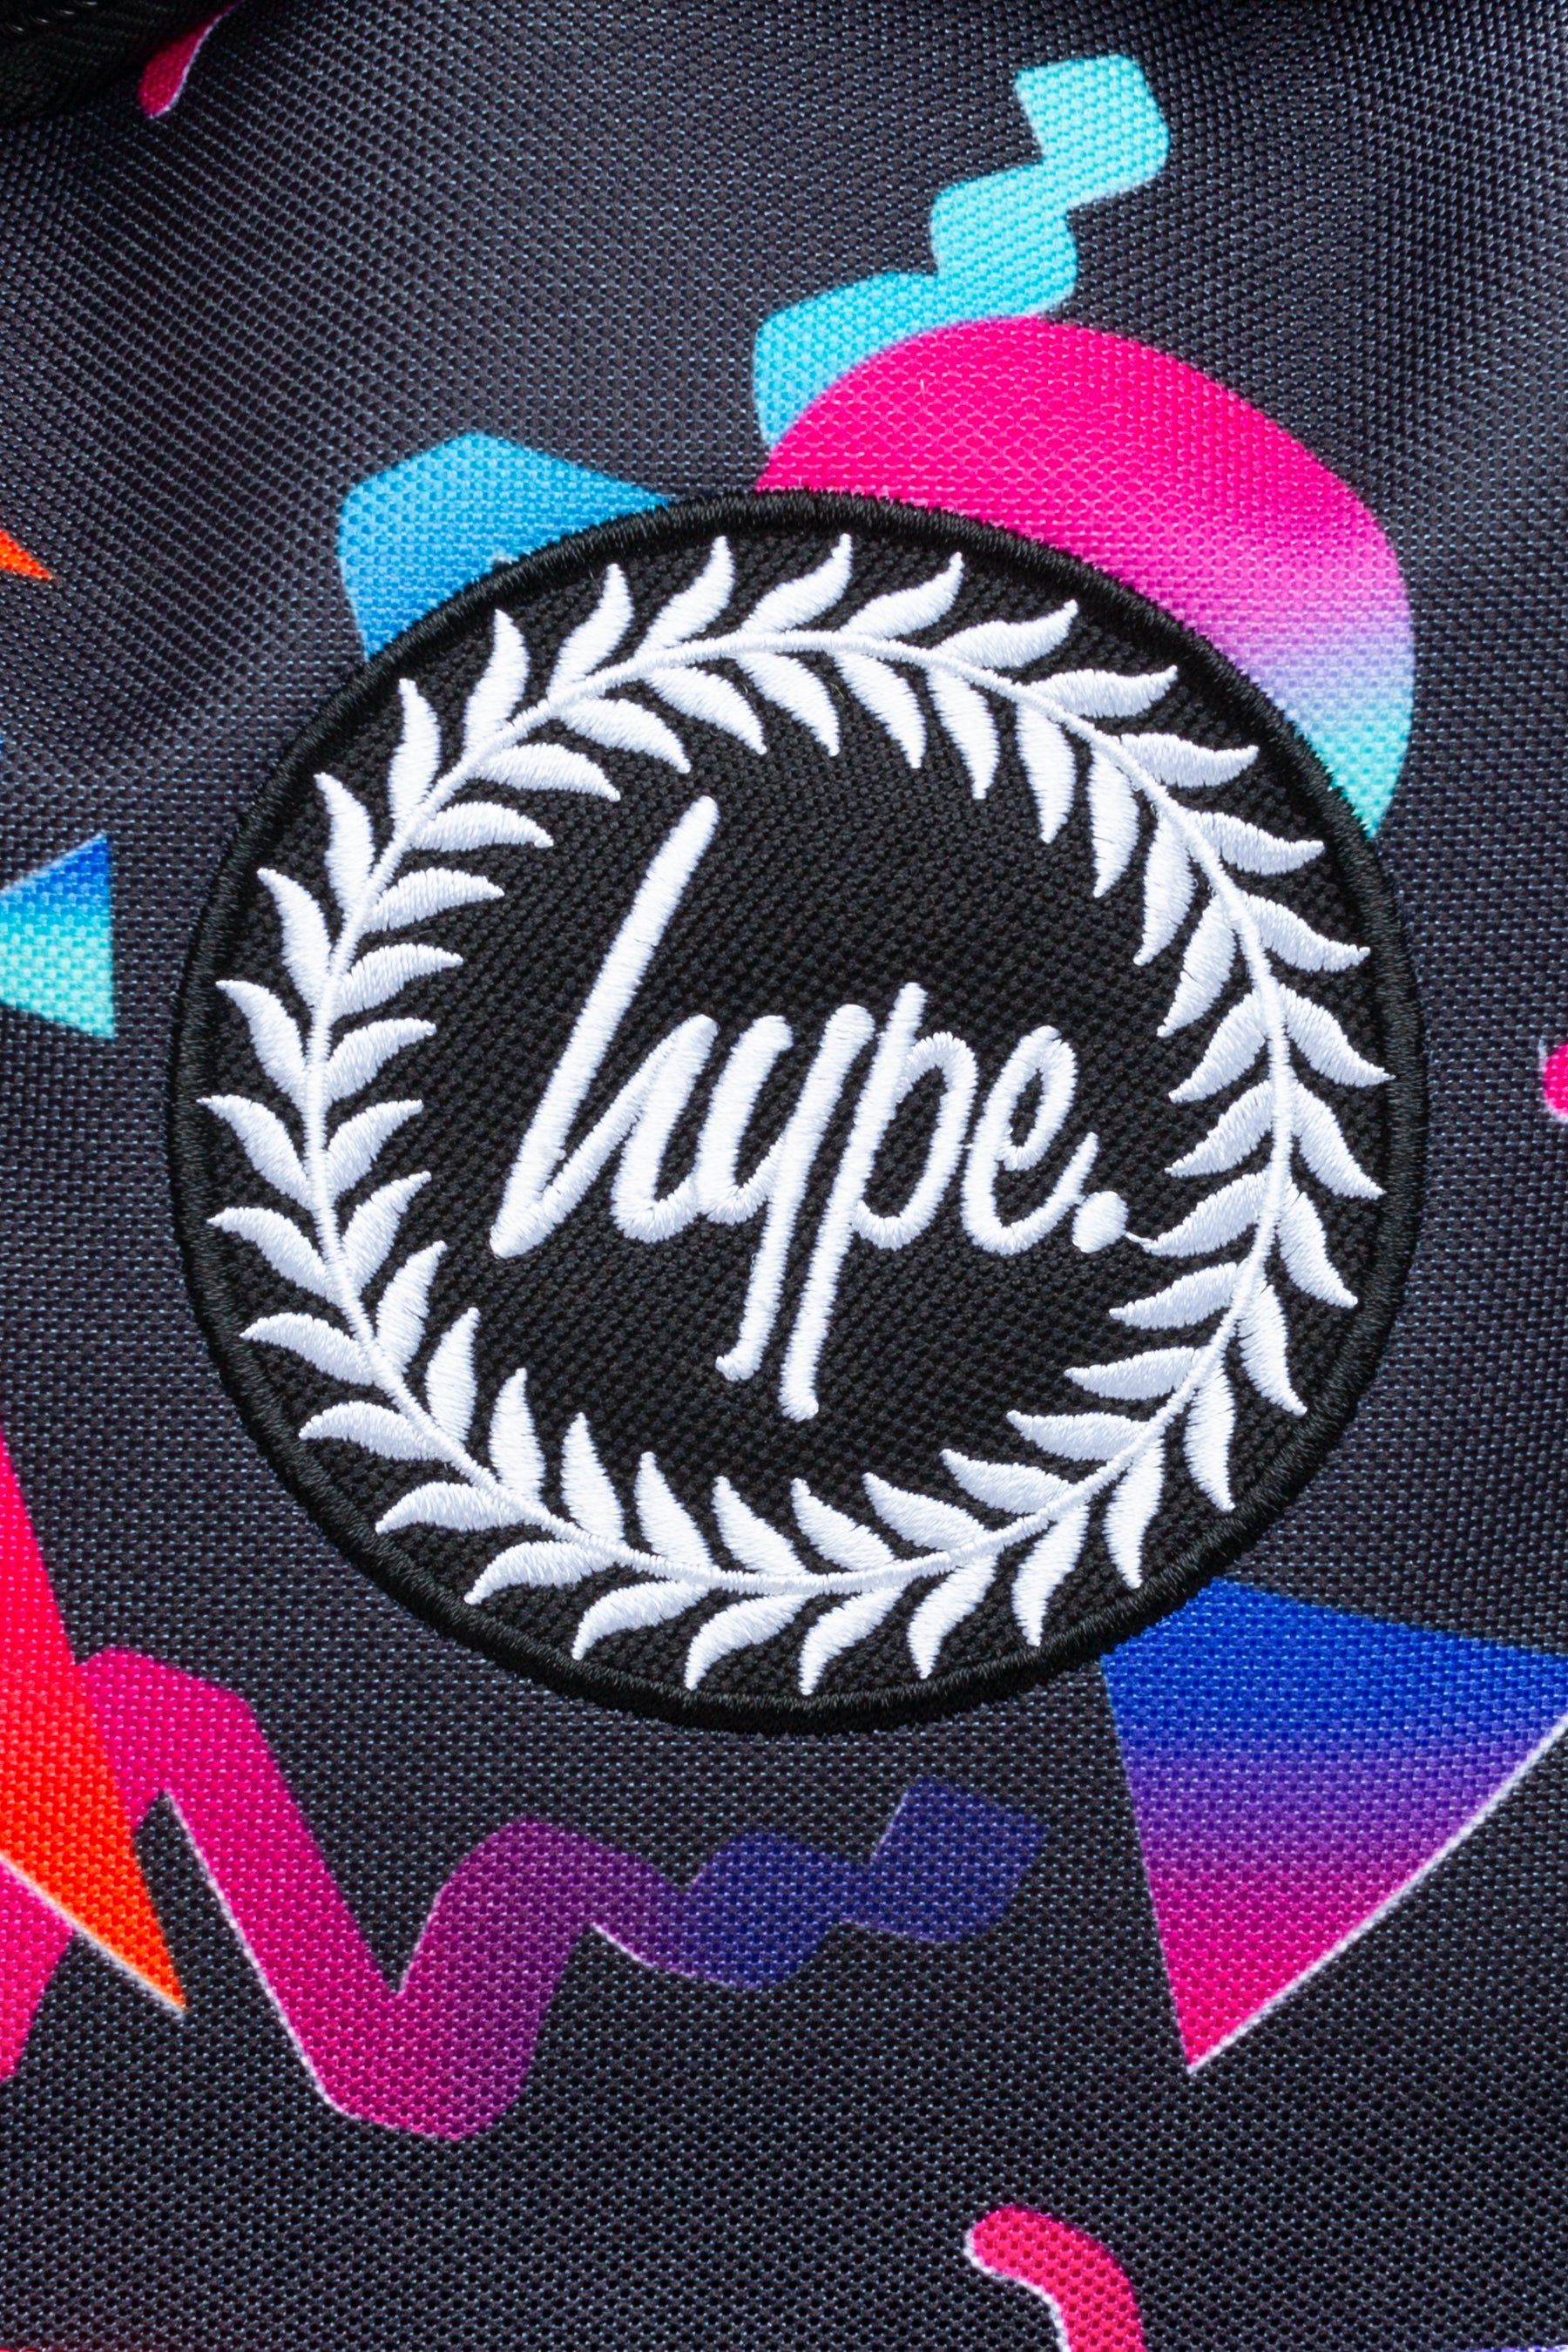 With a 90's throwback inspiration behind the bag, it's perfect to store your gym and dance kits. The HYPE. neon shapes backpack is designed with a black fabric base, with colour contrasting triangle, circle and zig-zag shapes in reds, pinks, oranges and blues. This backpack measures at 42cms x 30cms x 12cms, the right amount of room you require plus a lil' extra. The straps contain padding, creating the ultimate comfort. Wipe clean only.